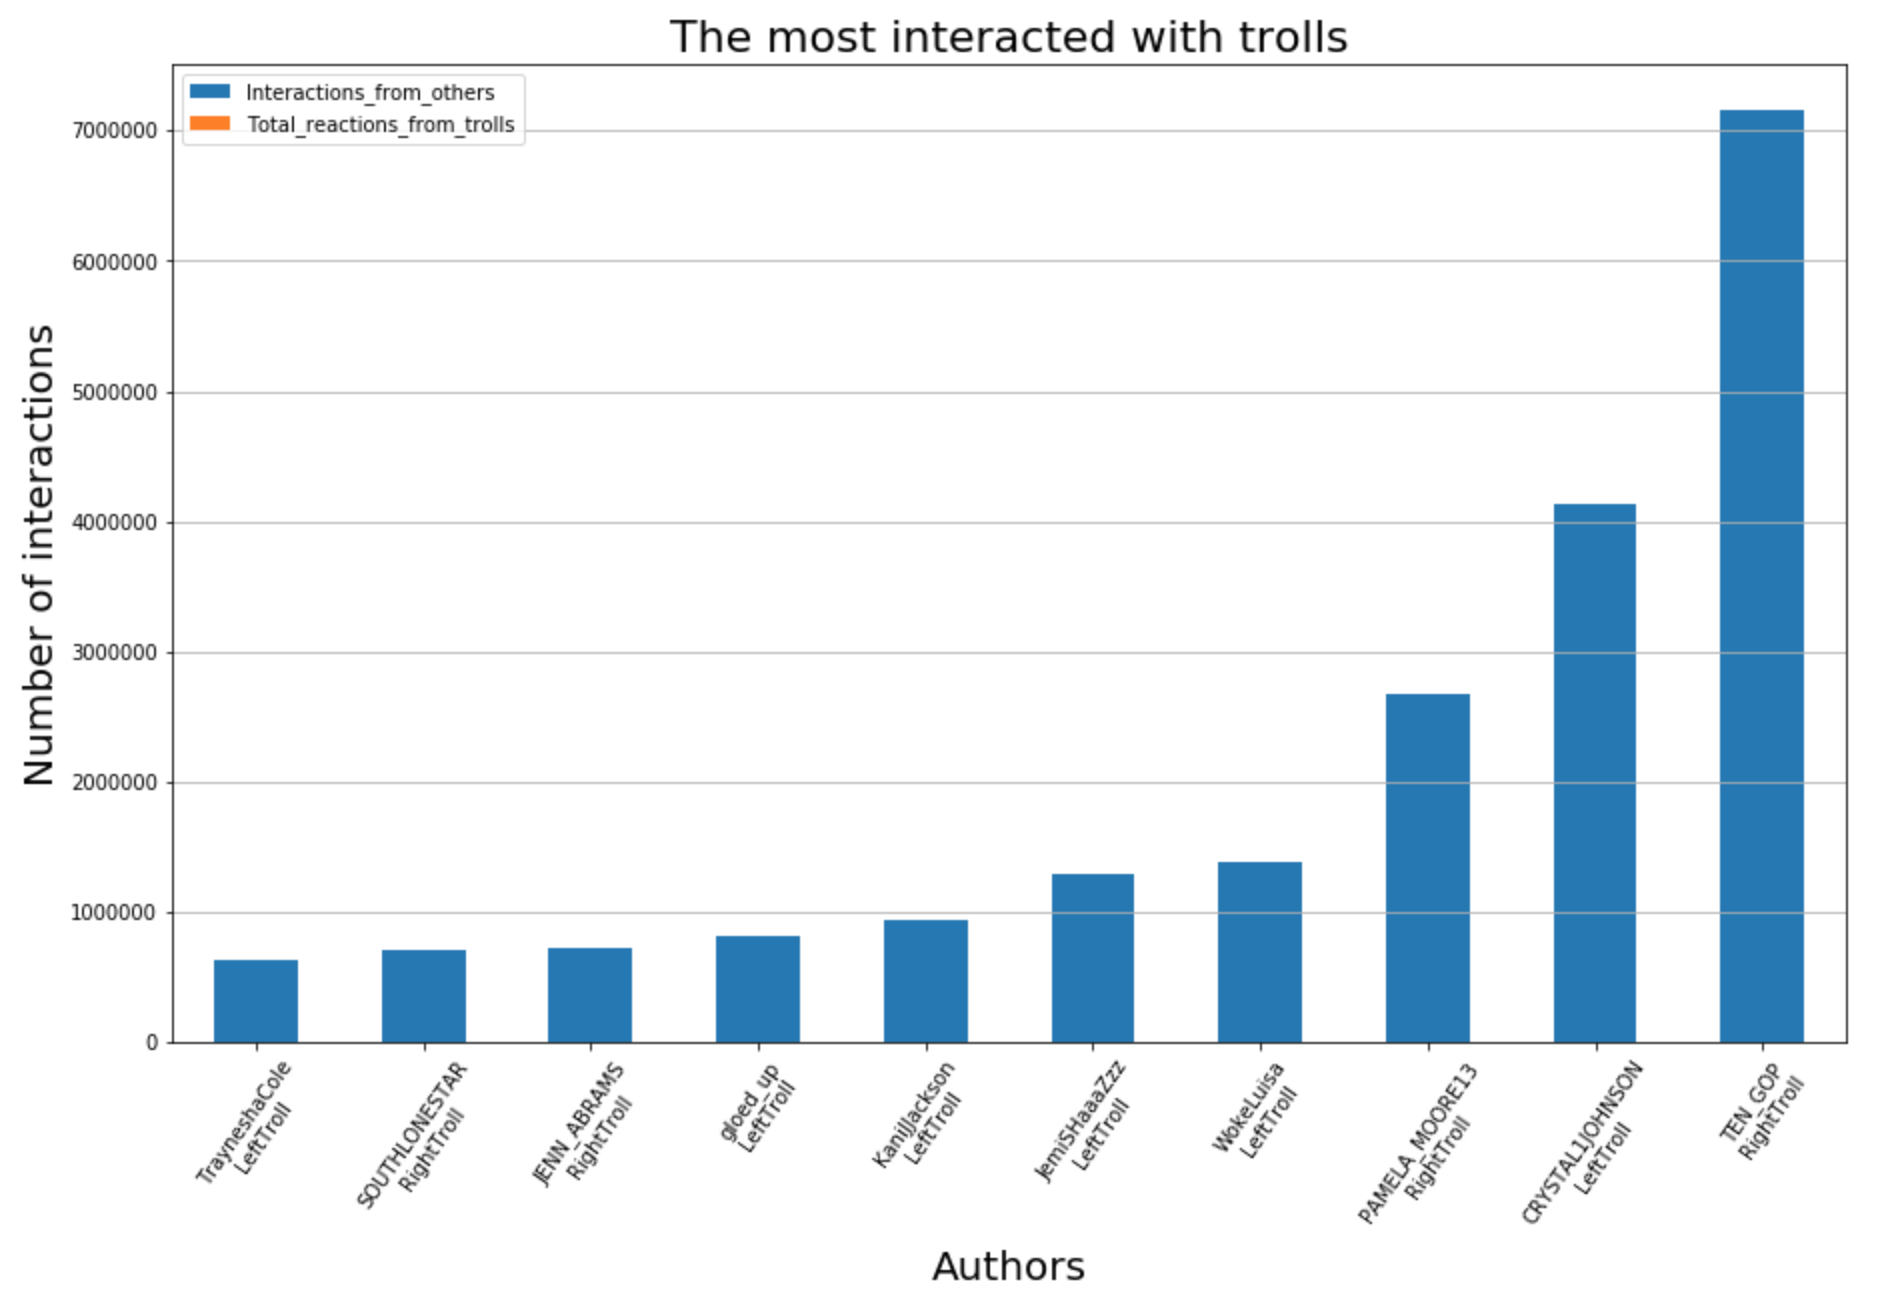 Users that have been most interacted with